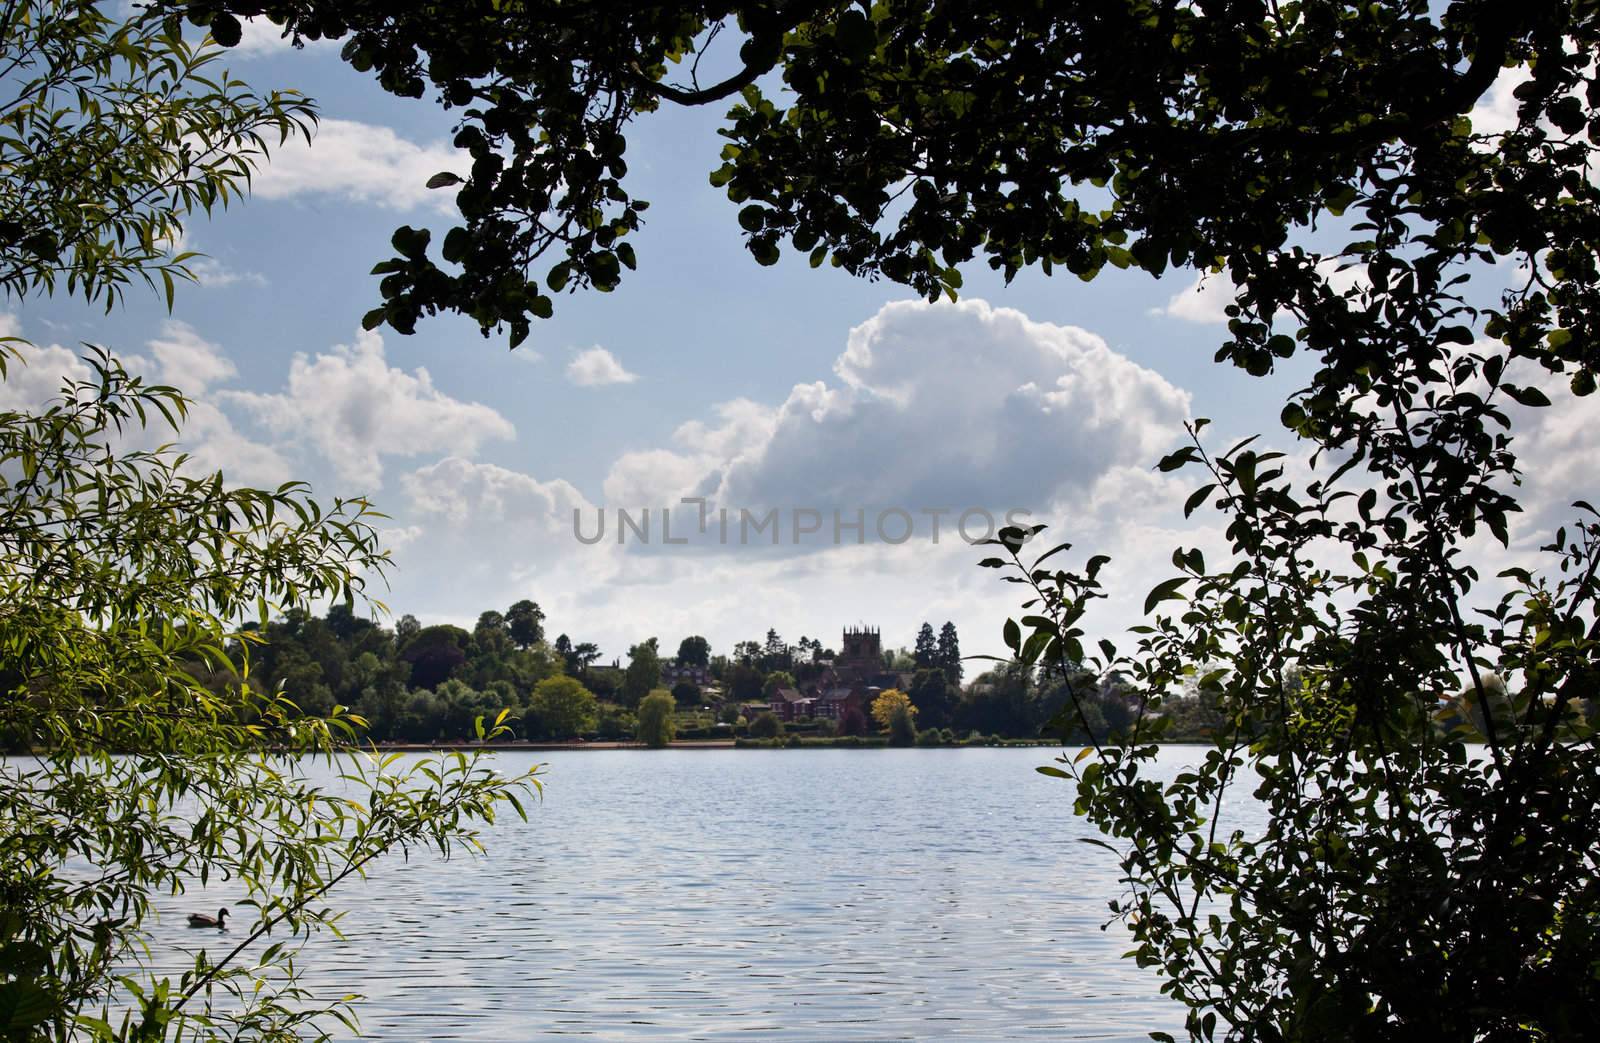 View of Ellesmere and lake framed by leaves of trees